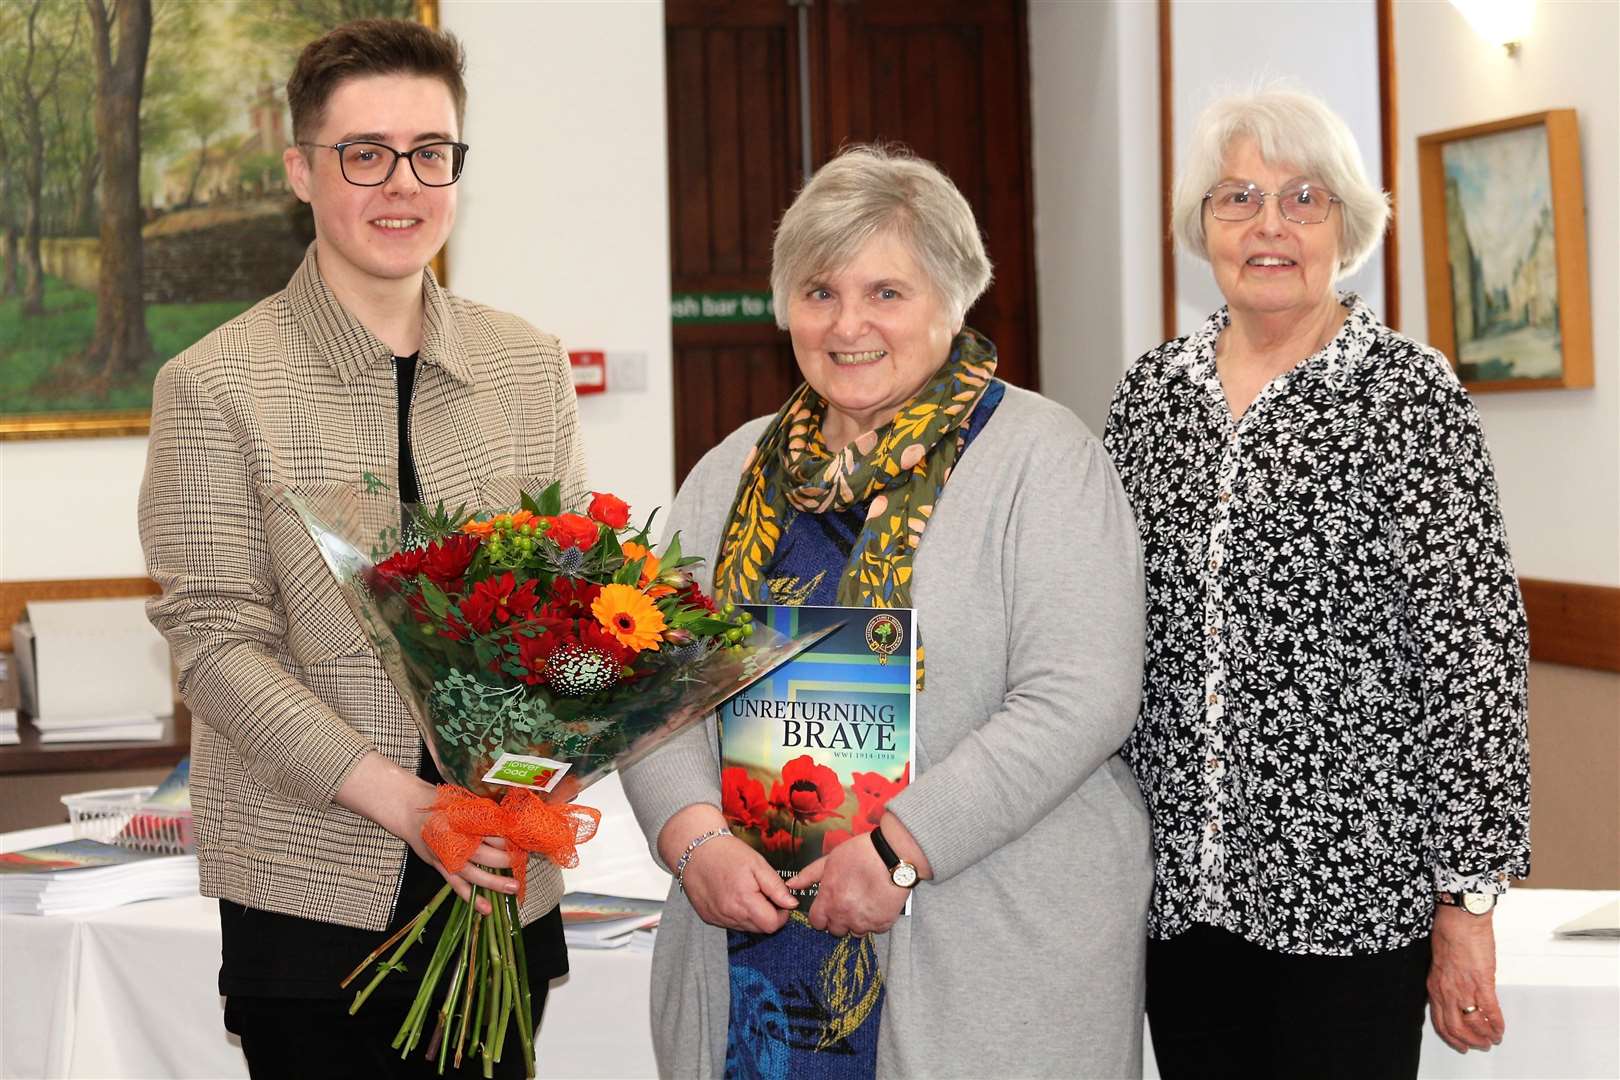 It's smiles all round as Kathy, at centre, is presented with flowers by Jayden Alexander and Anna Rogalski from Caithness Family History Society. Picture: Eswyl Fell